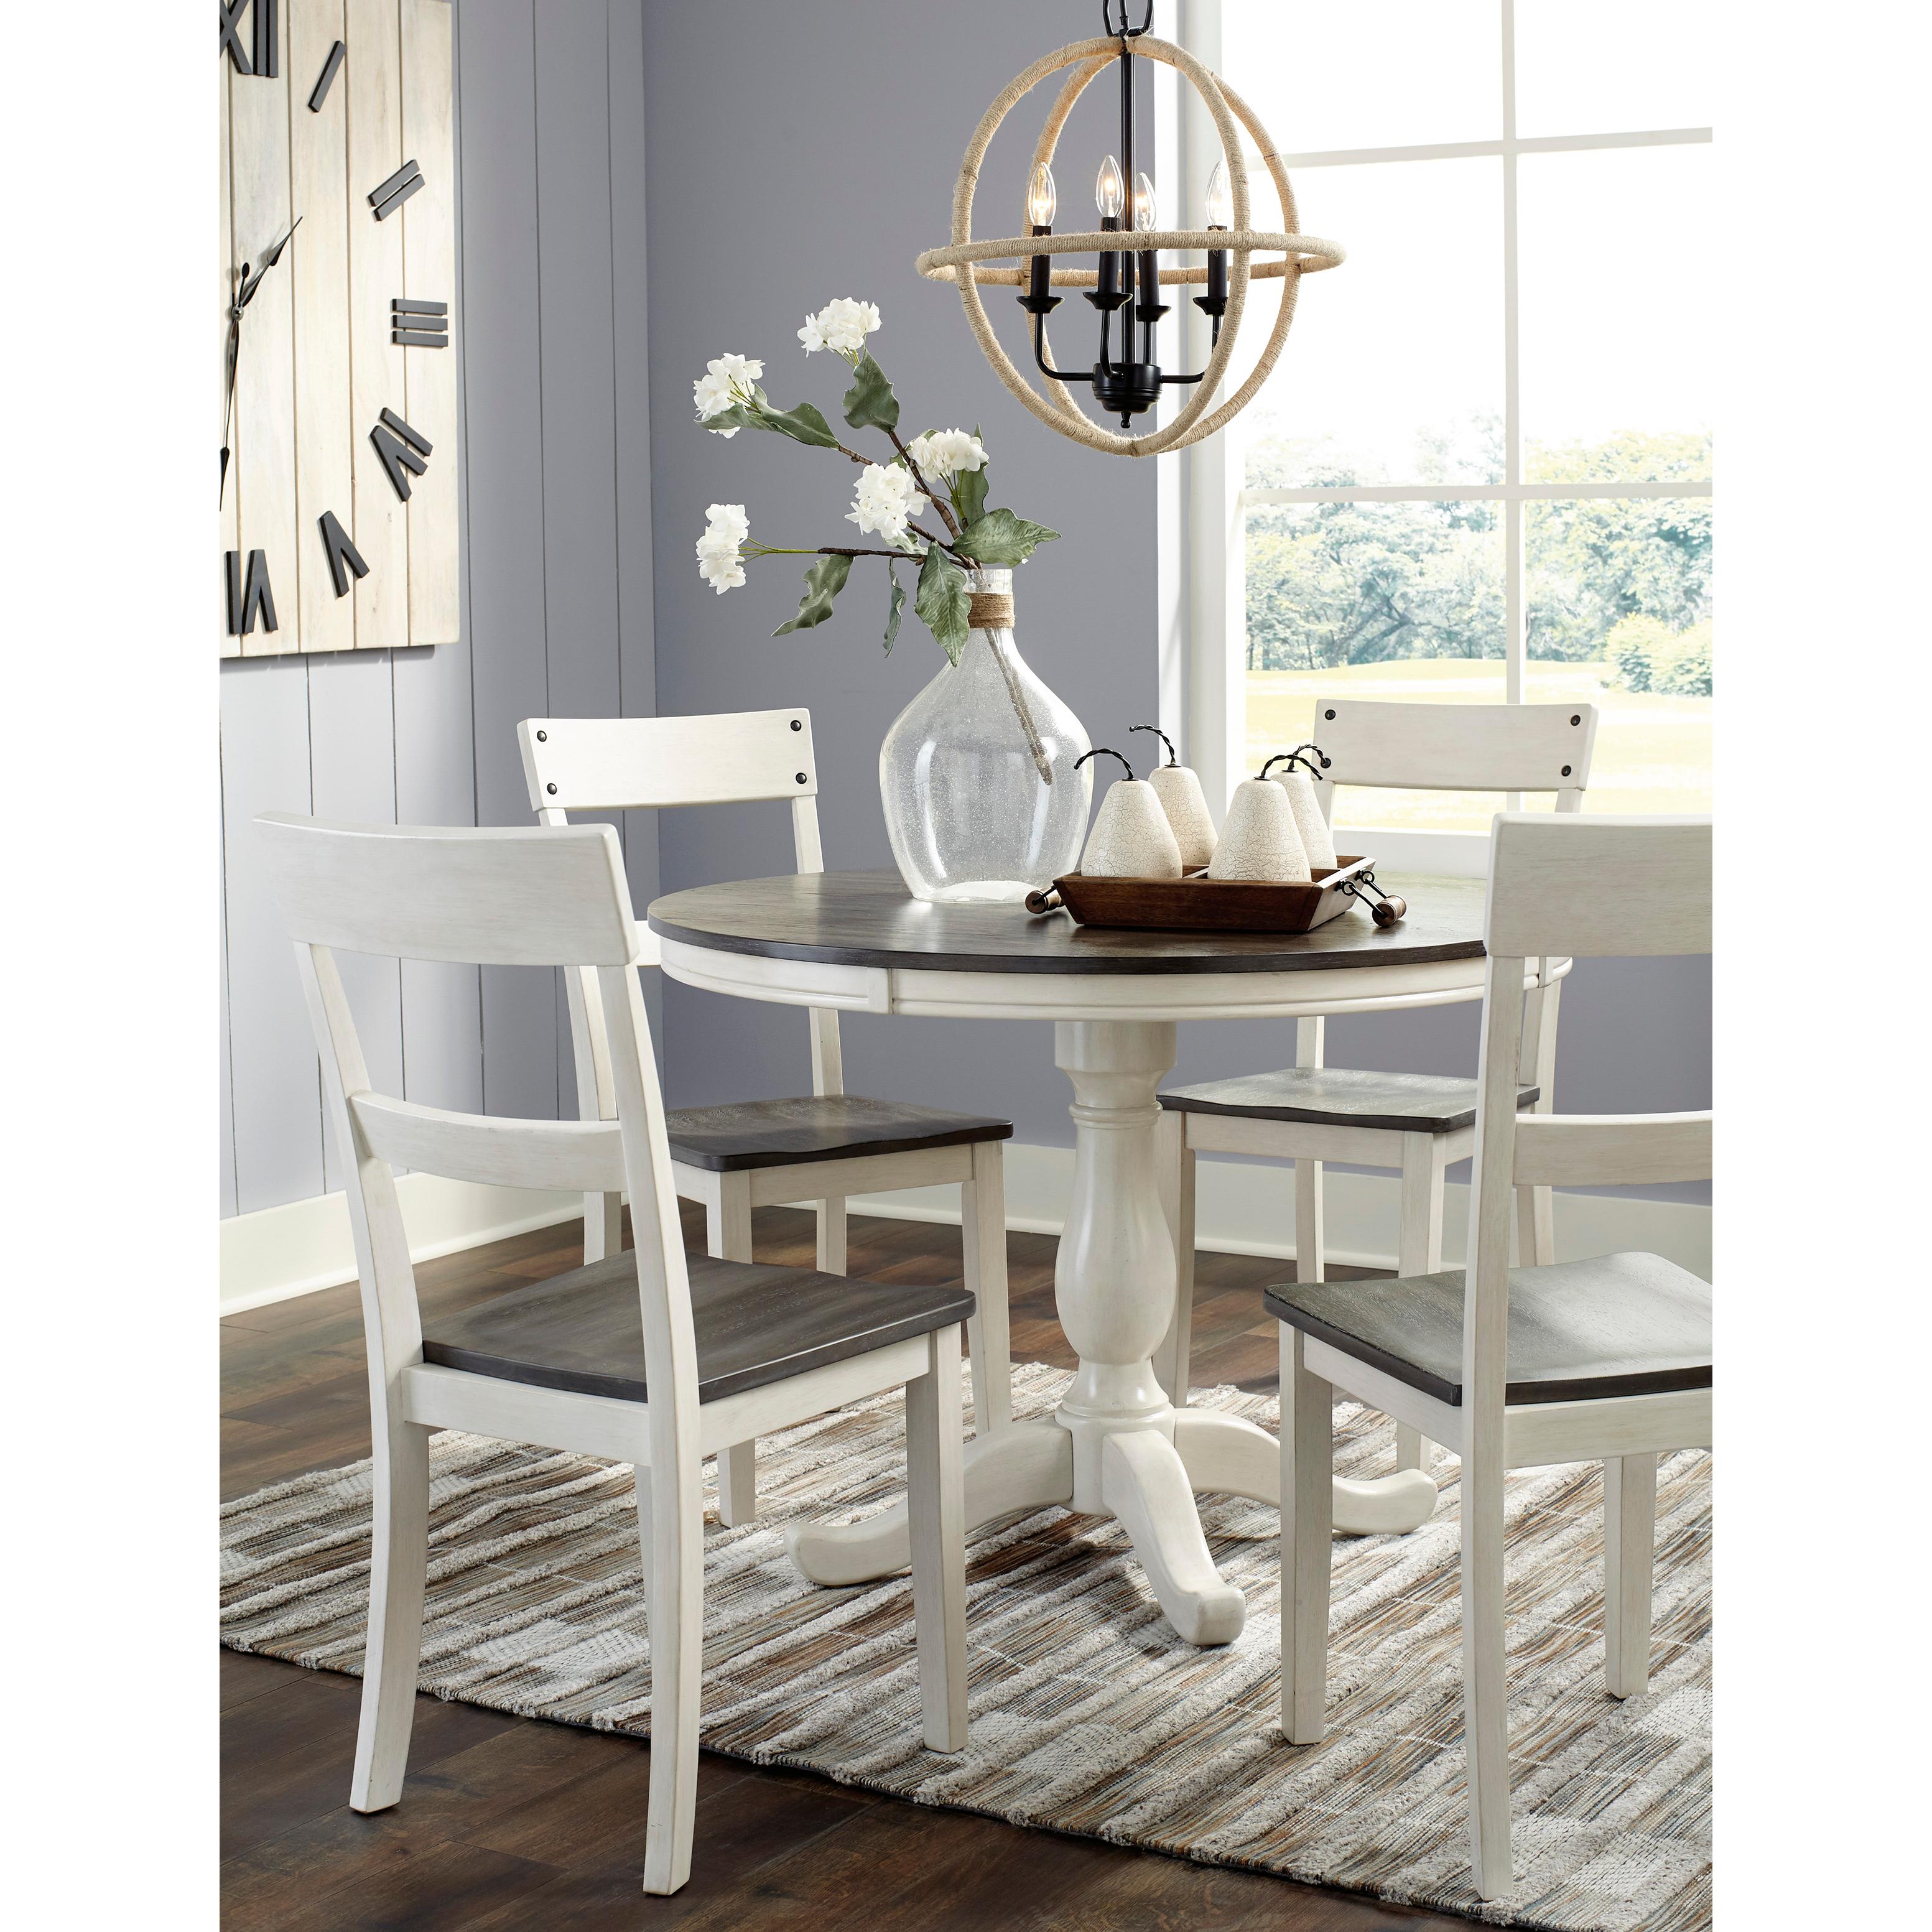 Signature Design by Ashley Round Nelling Dining Table with Pedestal Base D287-15B/D287-15T